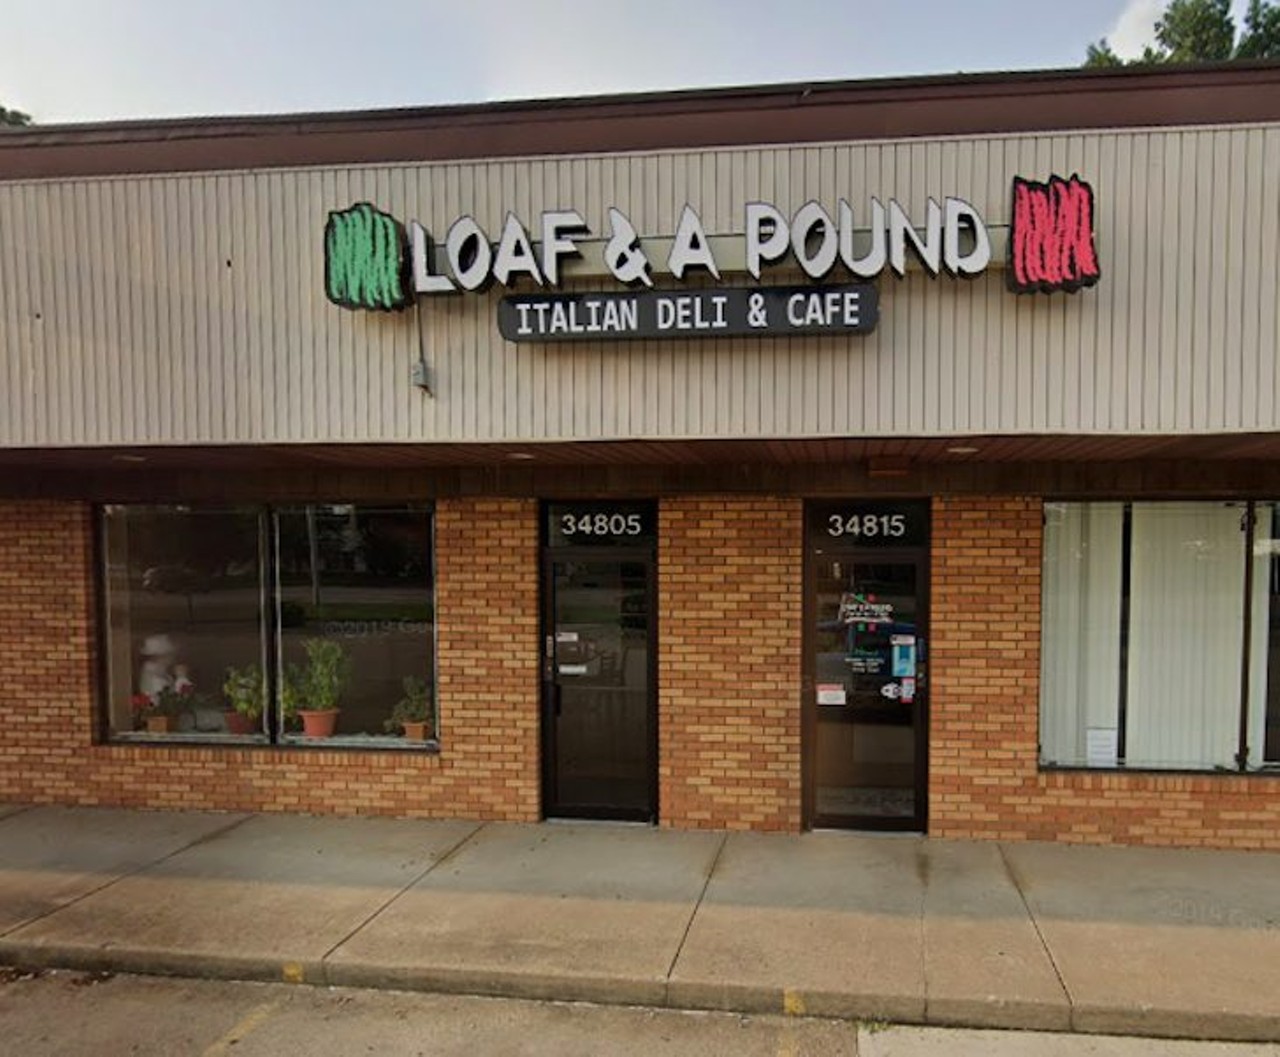 7. Loaf & A Pound
34815 Ford Rd., Westland; 734-728-5623
&#147;I love this place. Small, family owned place, the service is always top notch! The bada bing is my favorite! I haven't had a bad sandwich yet. The Italian pasta is really good as well as the cannolis.&#148; - Kelsie D.
Photo via Google Maps